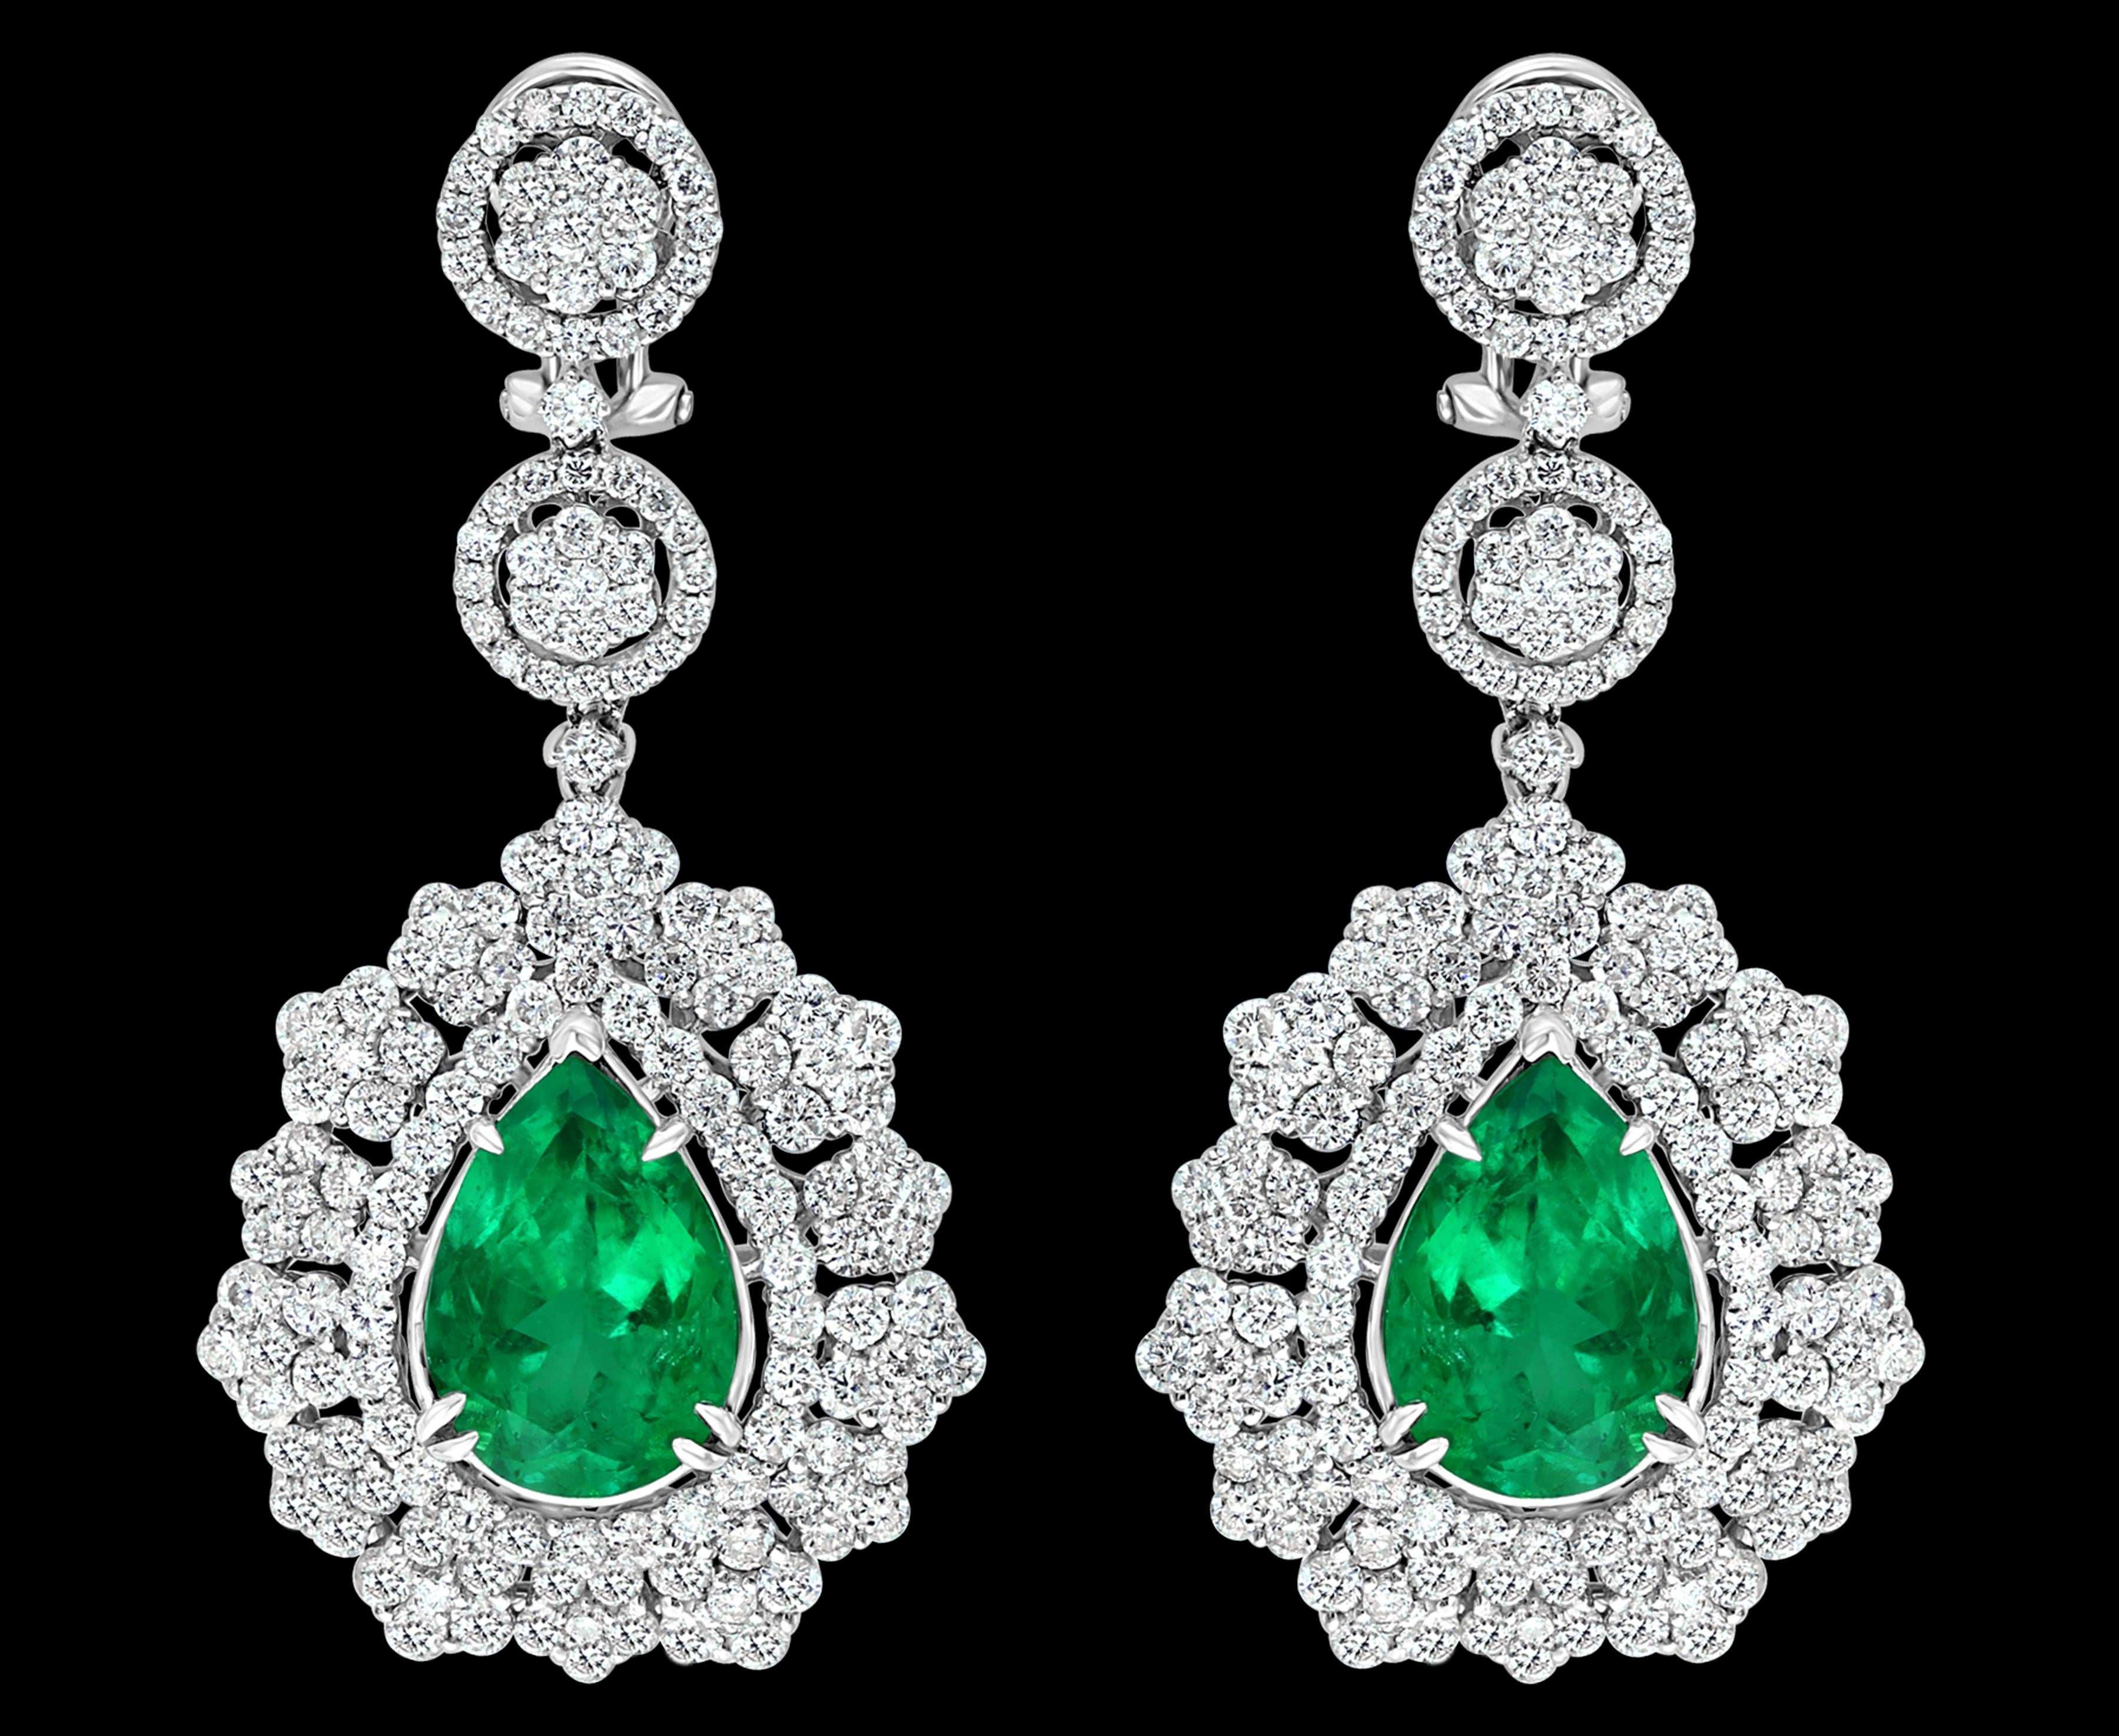 AGL Certified 11 Ct Pear/Drop Colombian Emerald 9 Ct Diamond Earrings 18K Gold
These Earrings are with  Perfect pair of matching emeralds  and Diamond  
This exquisite pair of earrings are beautifully crafted with 18 karat white gold  weighing  18